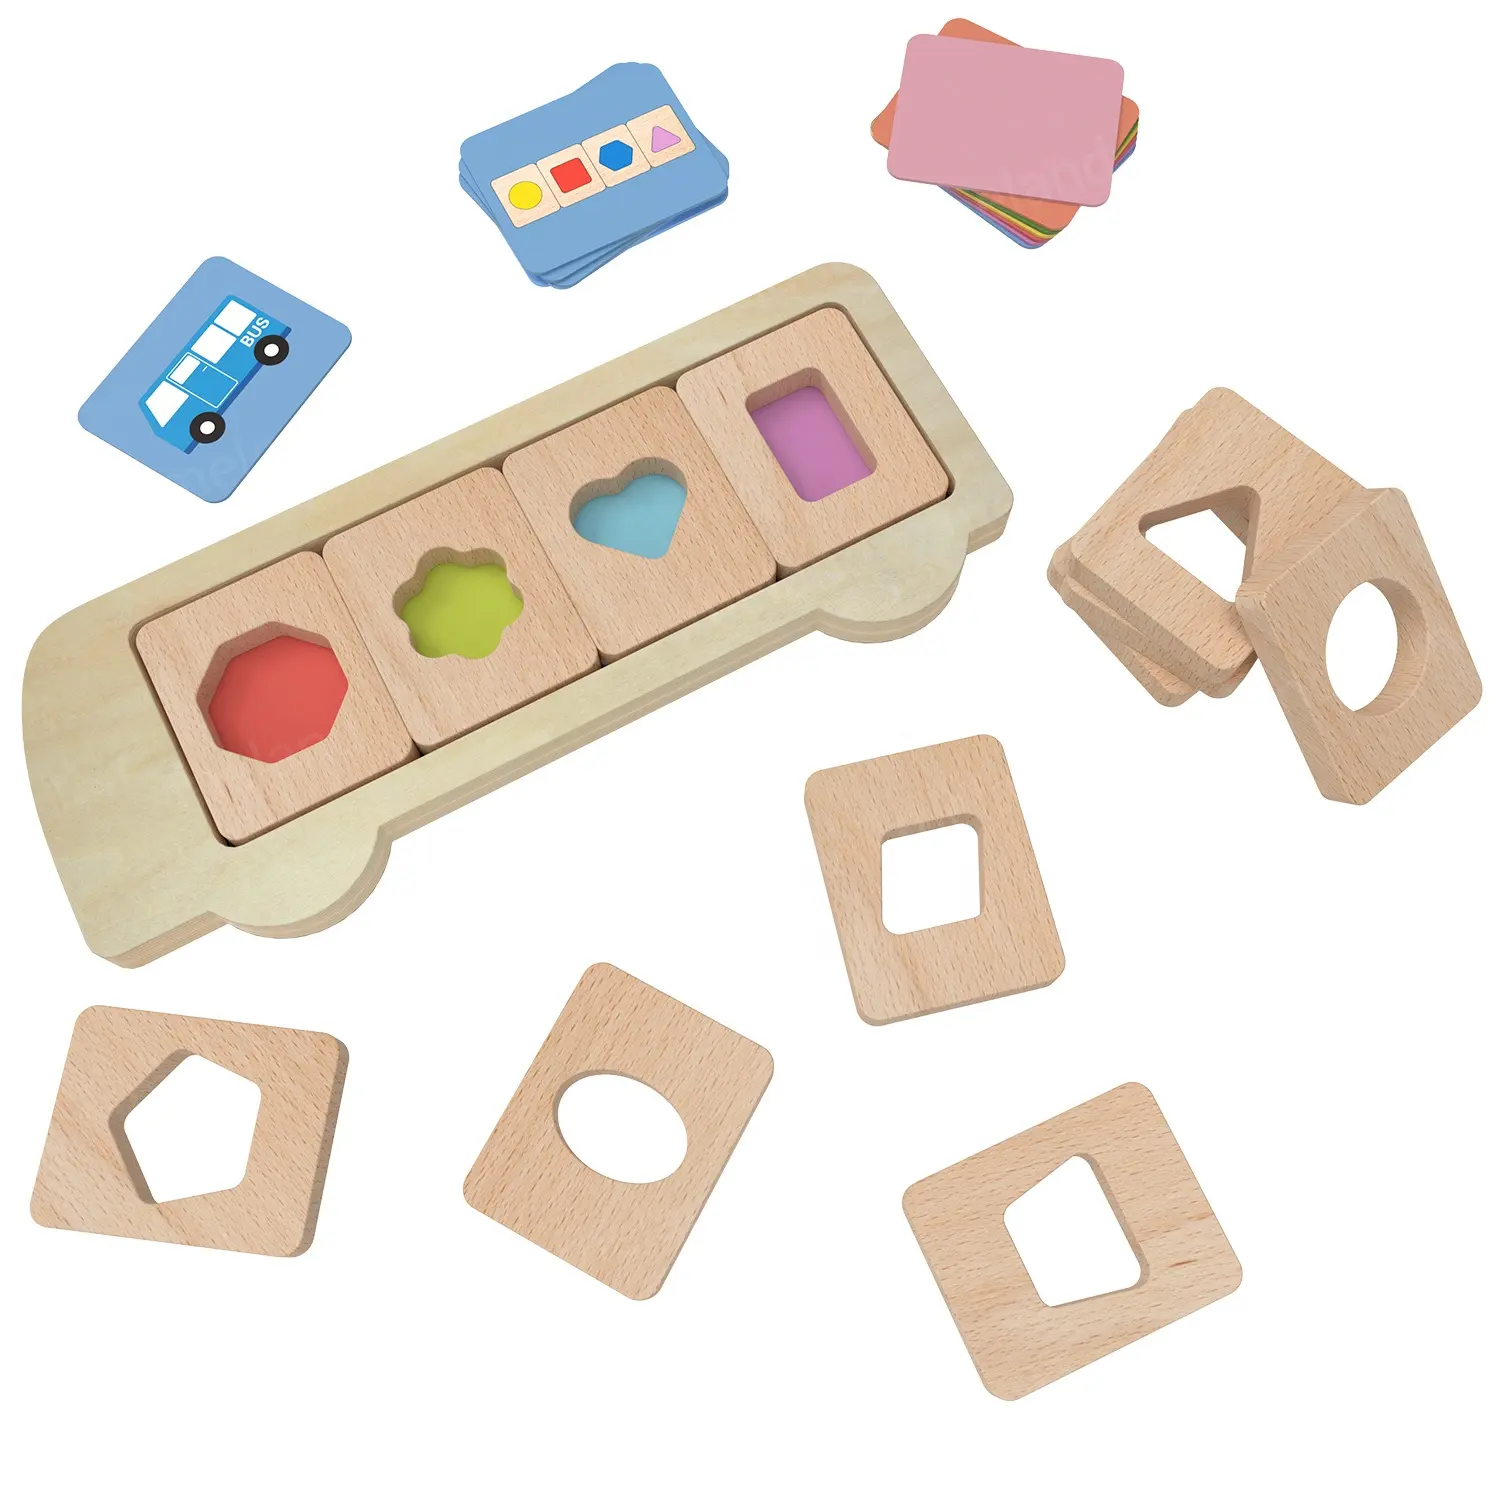 Wooden Puzzle Toy Colorful Geometric Shape Wooden Jigsaw Baby Educational Toy